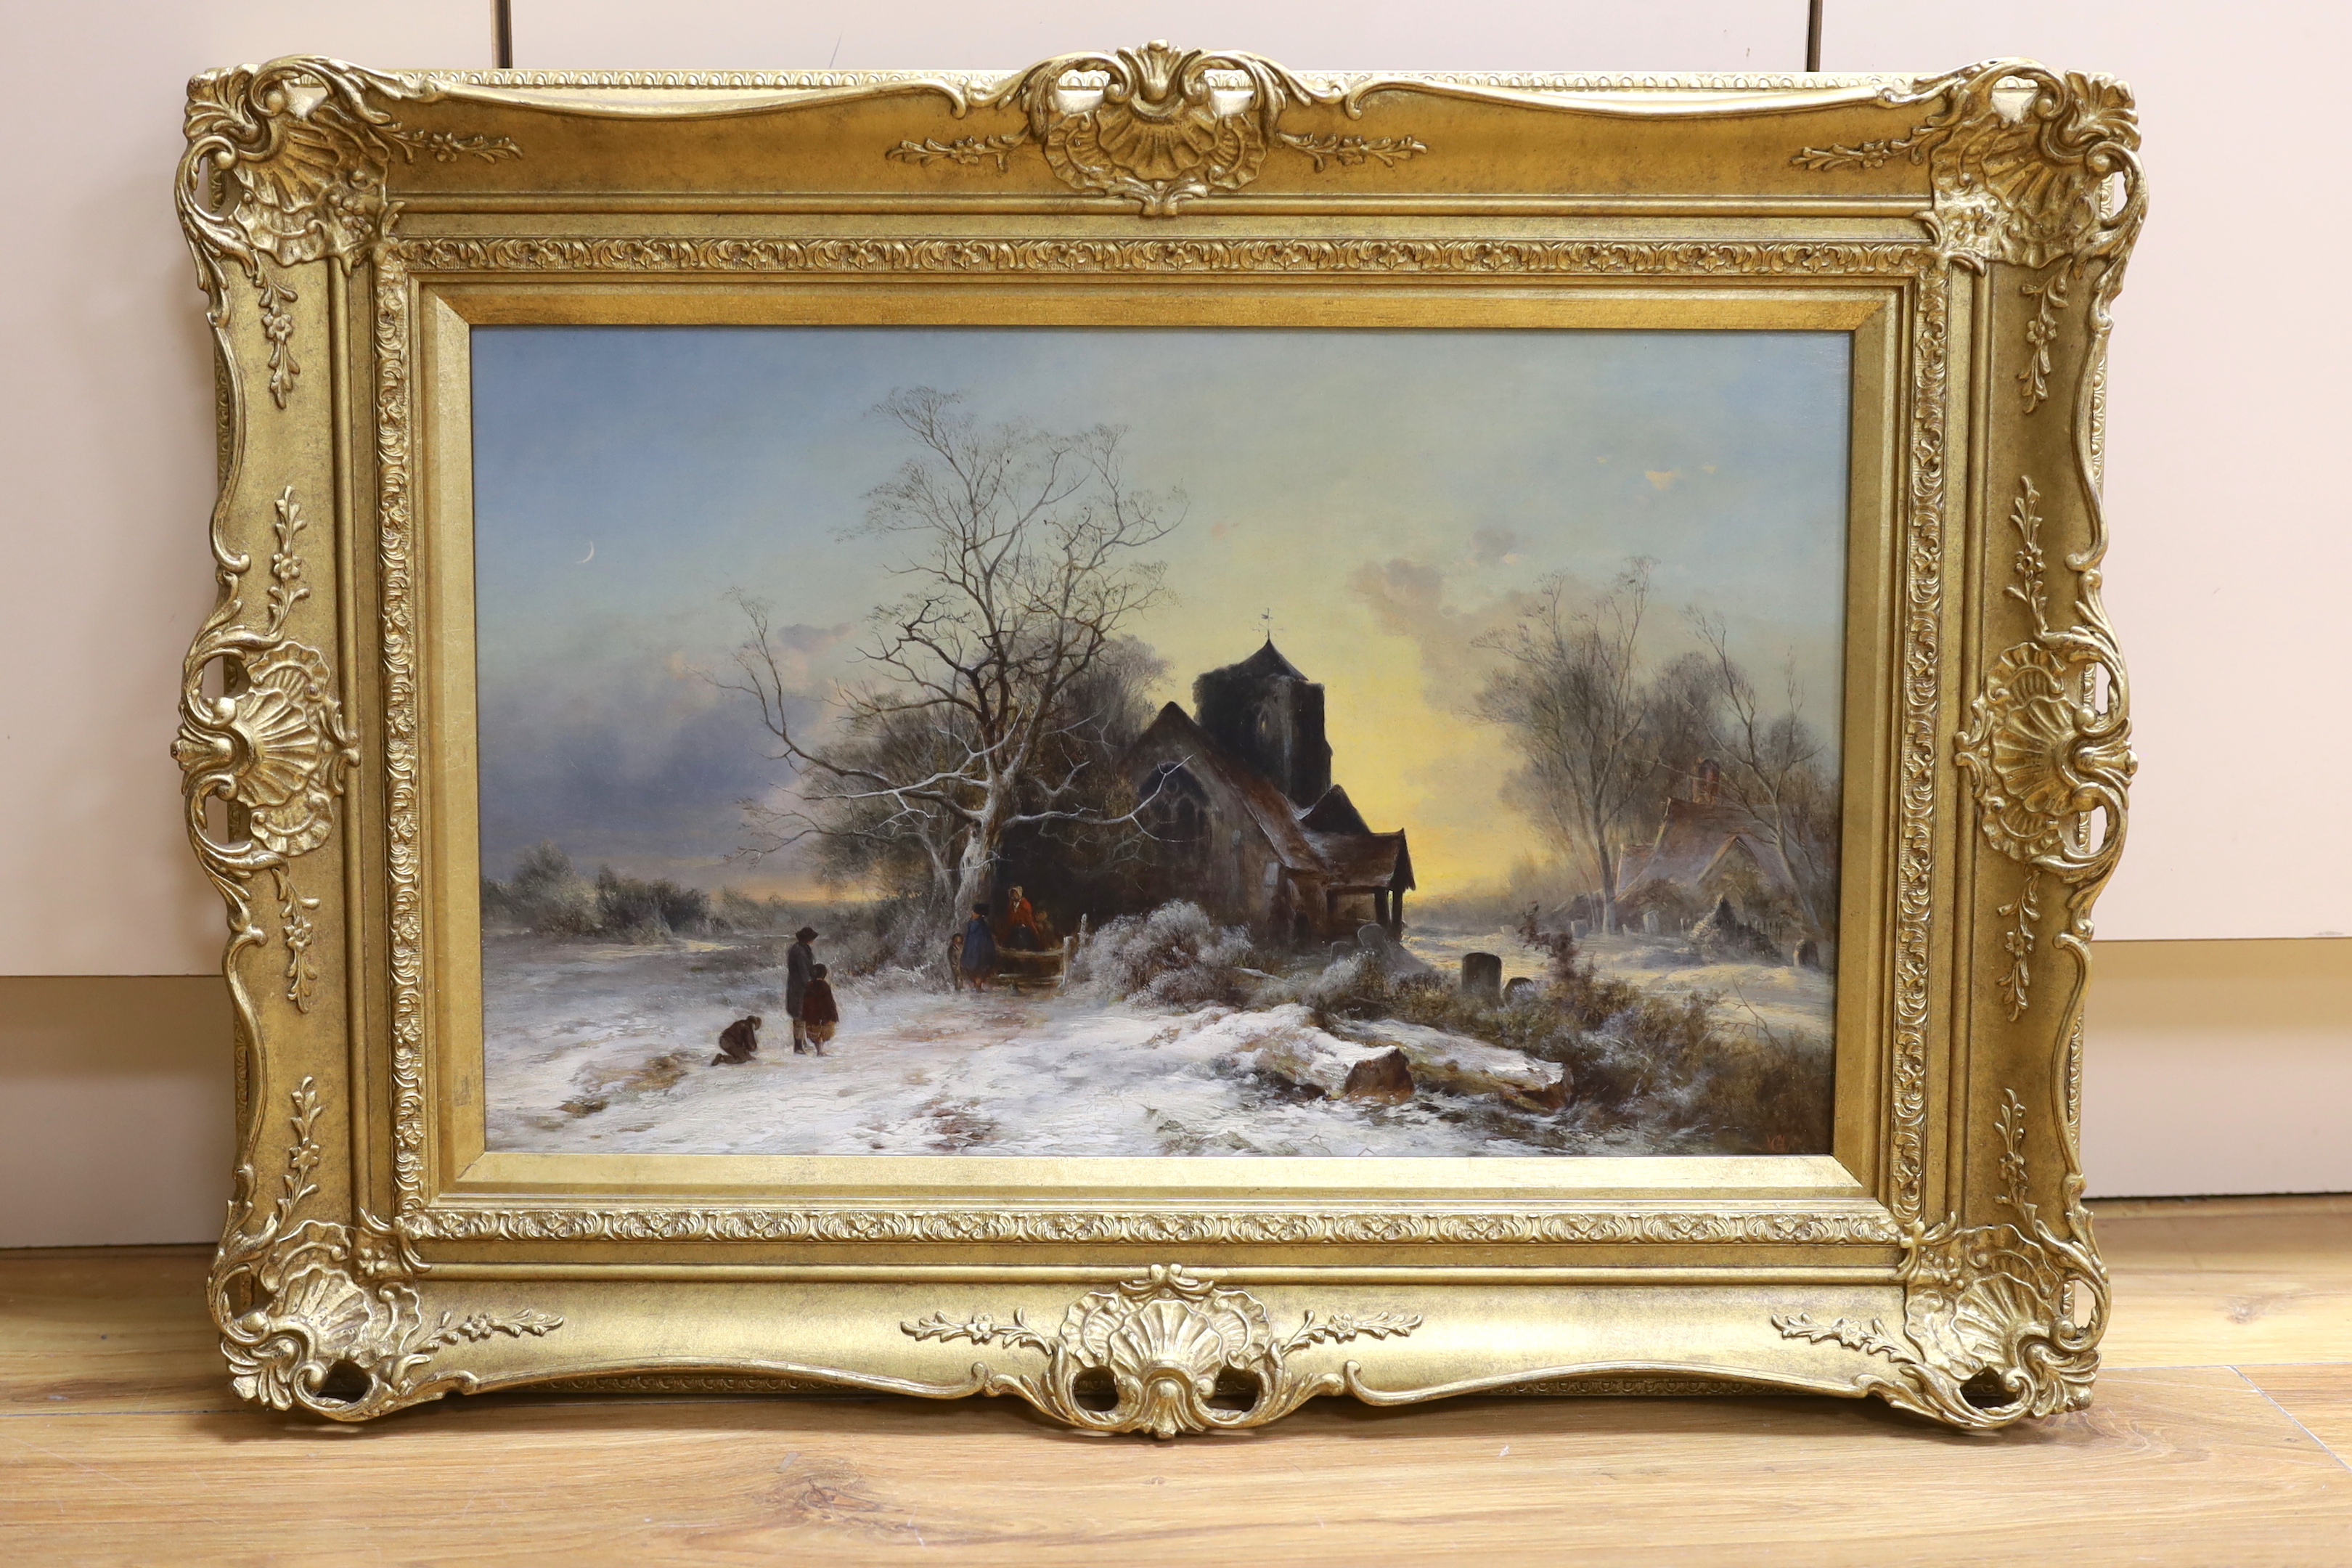 G. Williams, oil on canvas, Winter landscape with figures before a church, ink inscription verso, monogrammed, 31 x 51cm